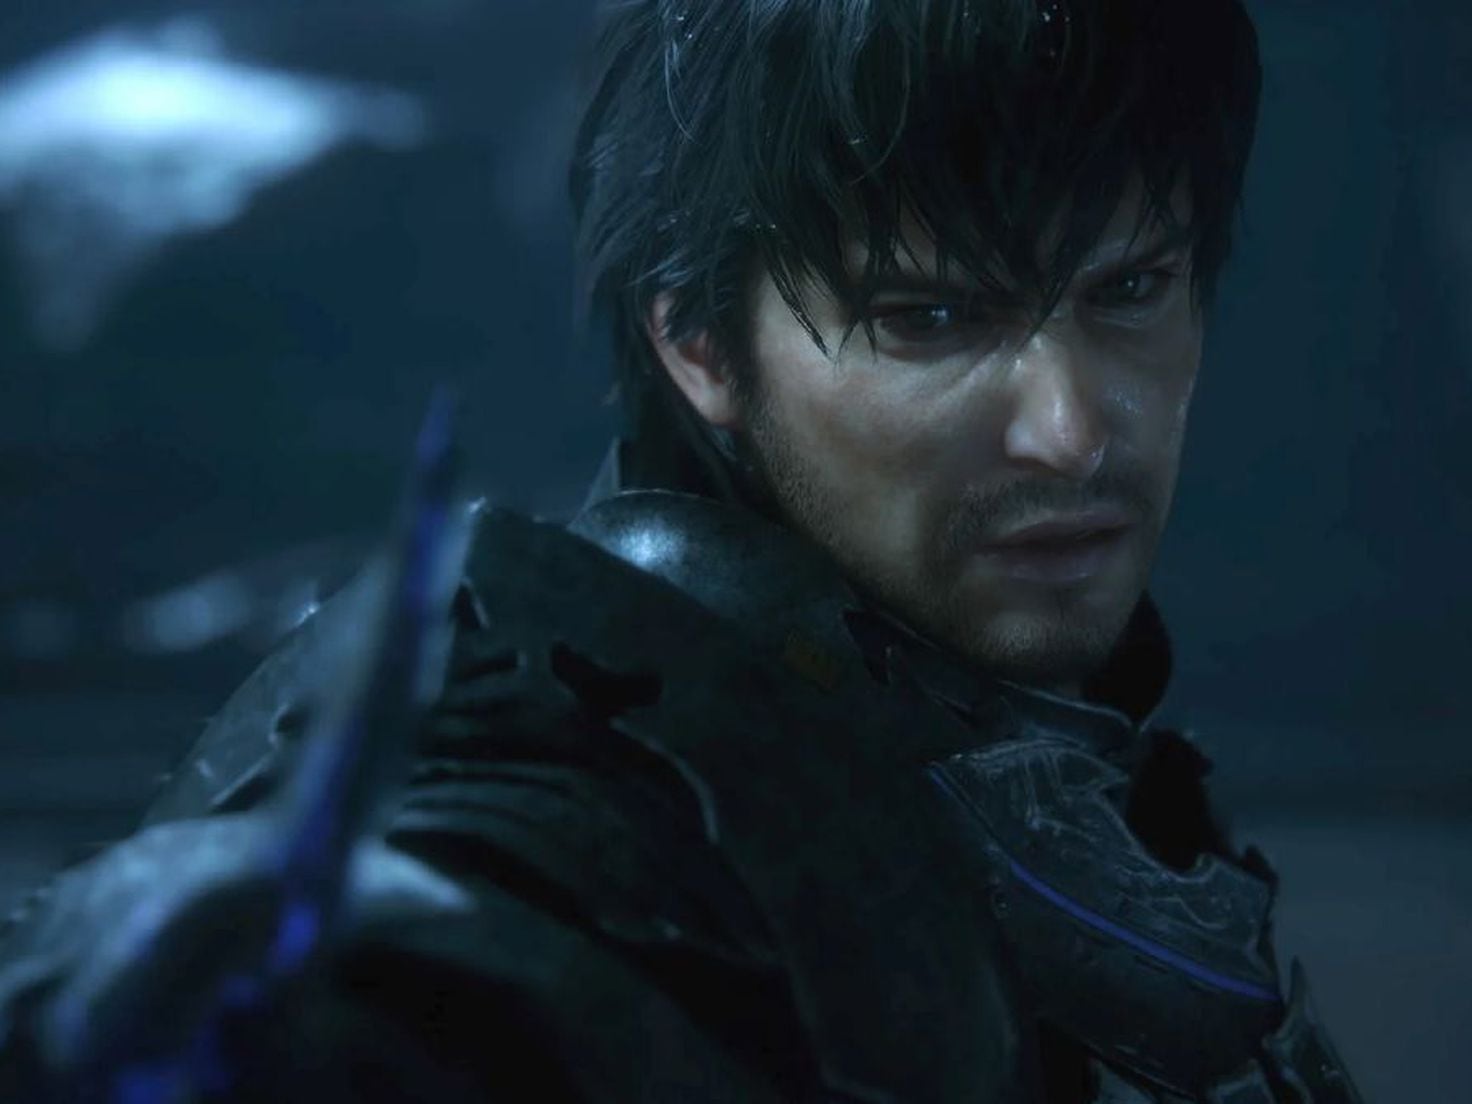 Final Fantasy 16: release date, trailers, gameplay, and more